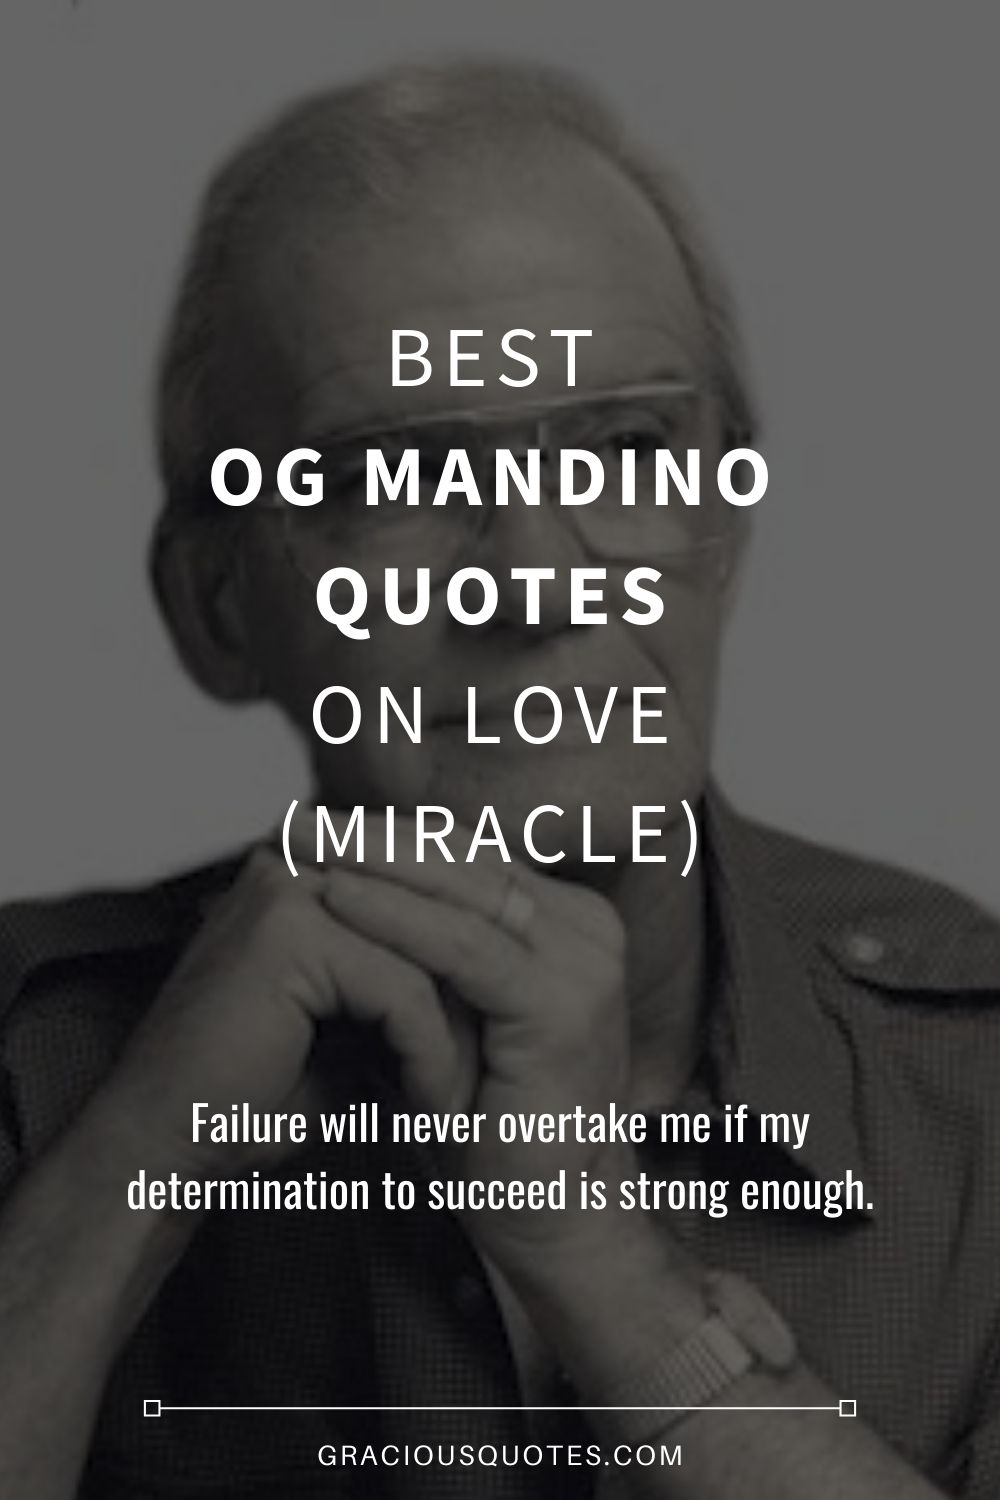 Best Og Mandino Quotes on Love (MIRACLE) - Gracious Quotes